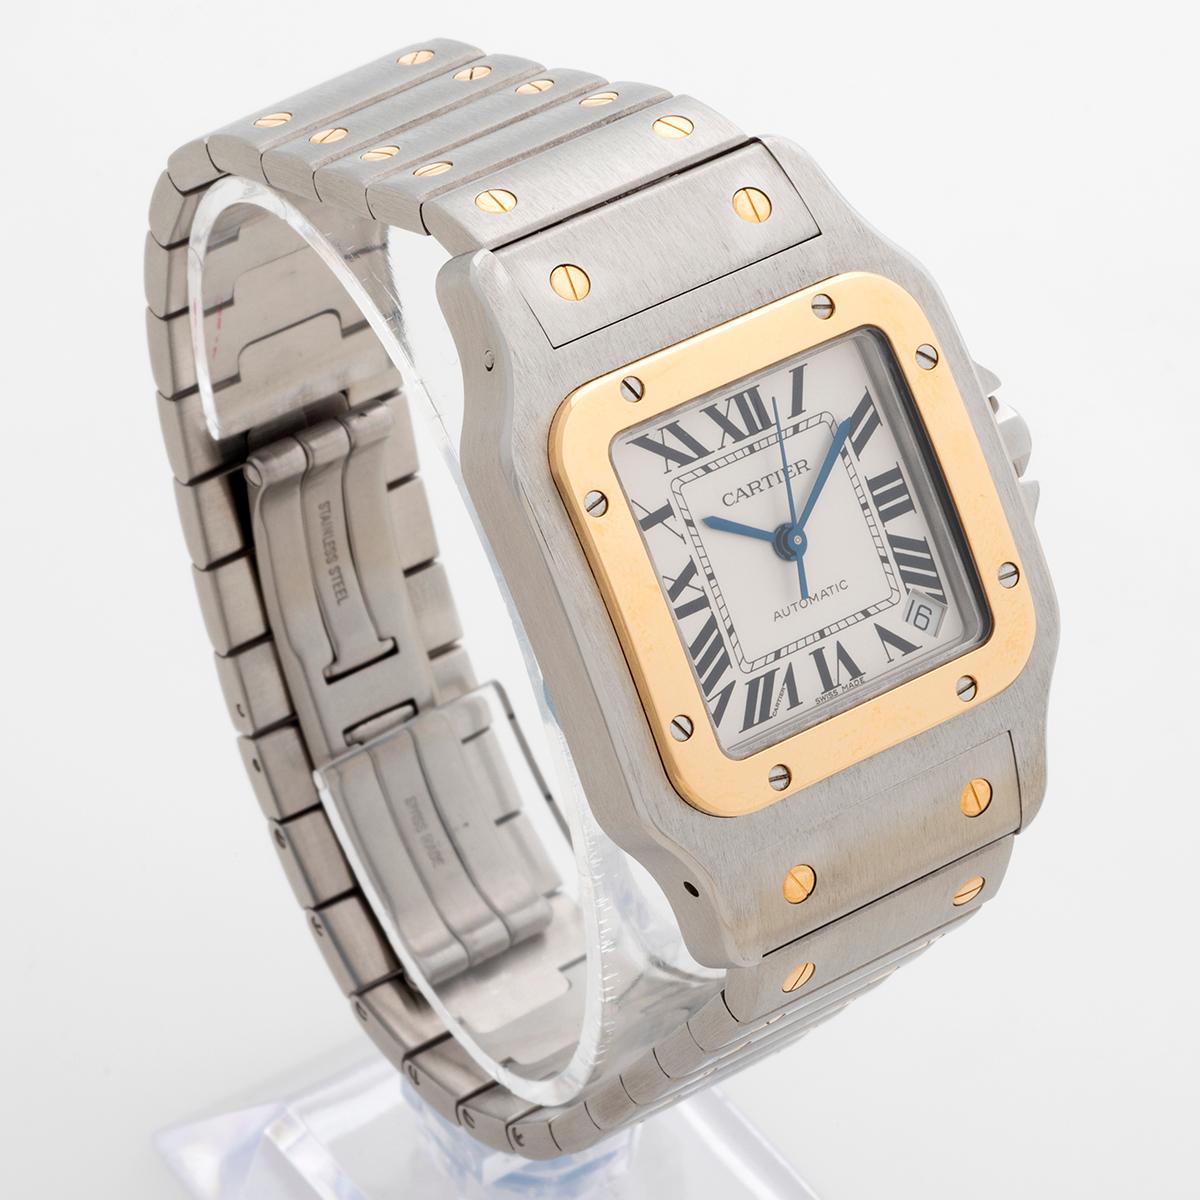 Our rare Cartier Santos Galbee XL features a 18k yellow gold and stainless steel case of 25mm x 45mm with 18k yellow gold and stainless steel bracelet, is powered by an automatic movement and has a date function. This largest (in period) Santos